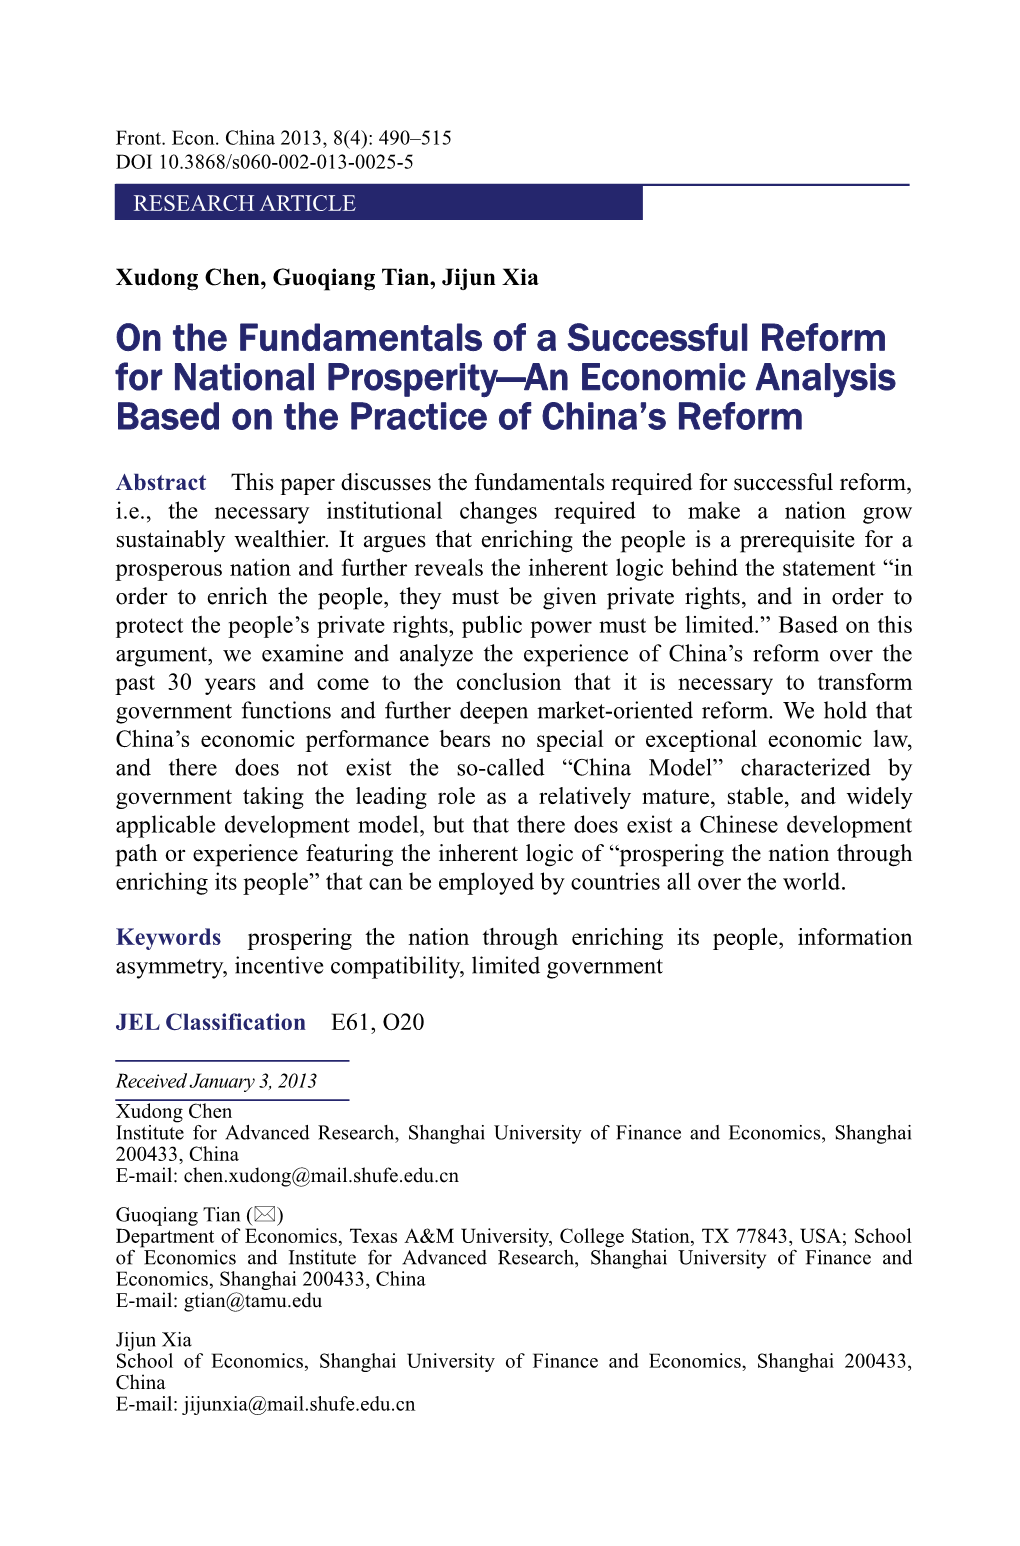 On the Fundamentals of a Successful Reform for National Prosperity—An Economic Analysis Based on the Practice of China’S Reform